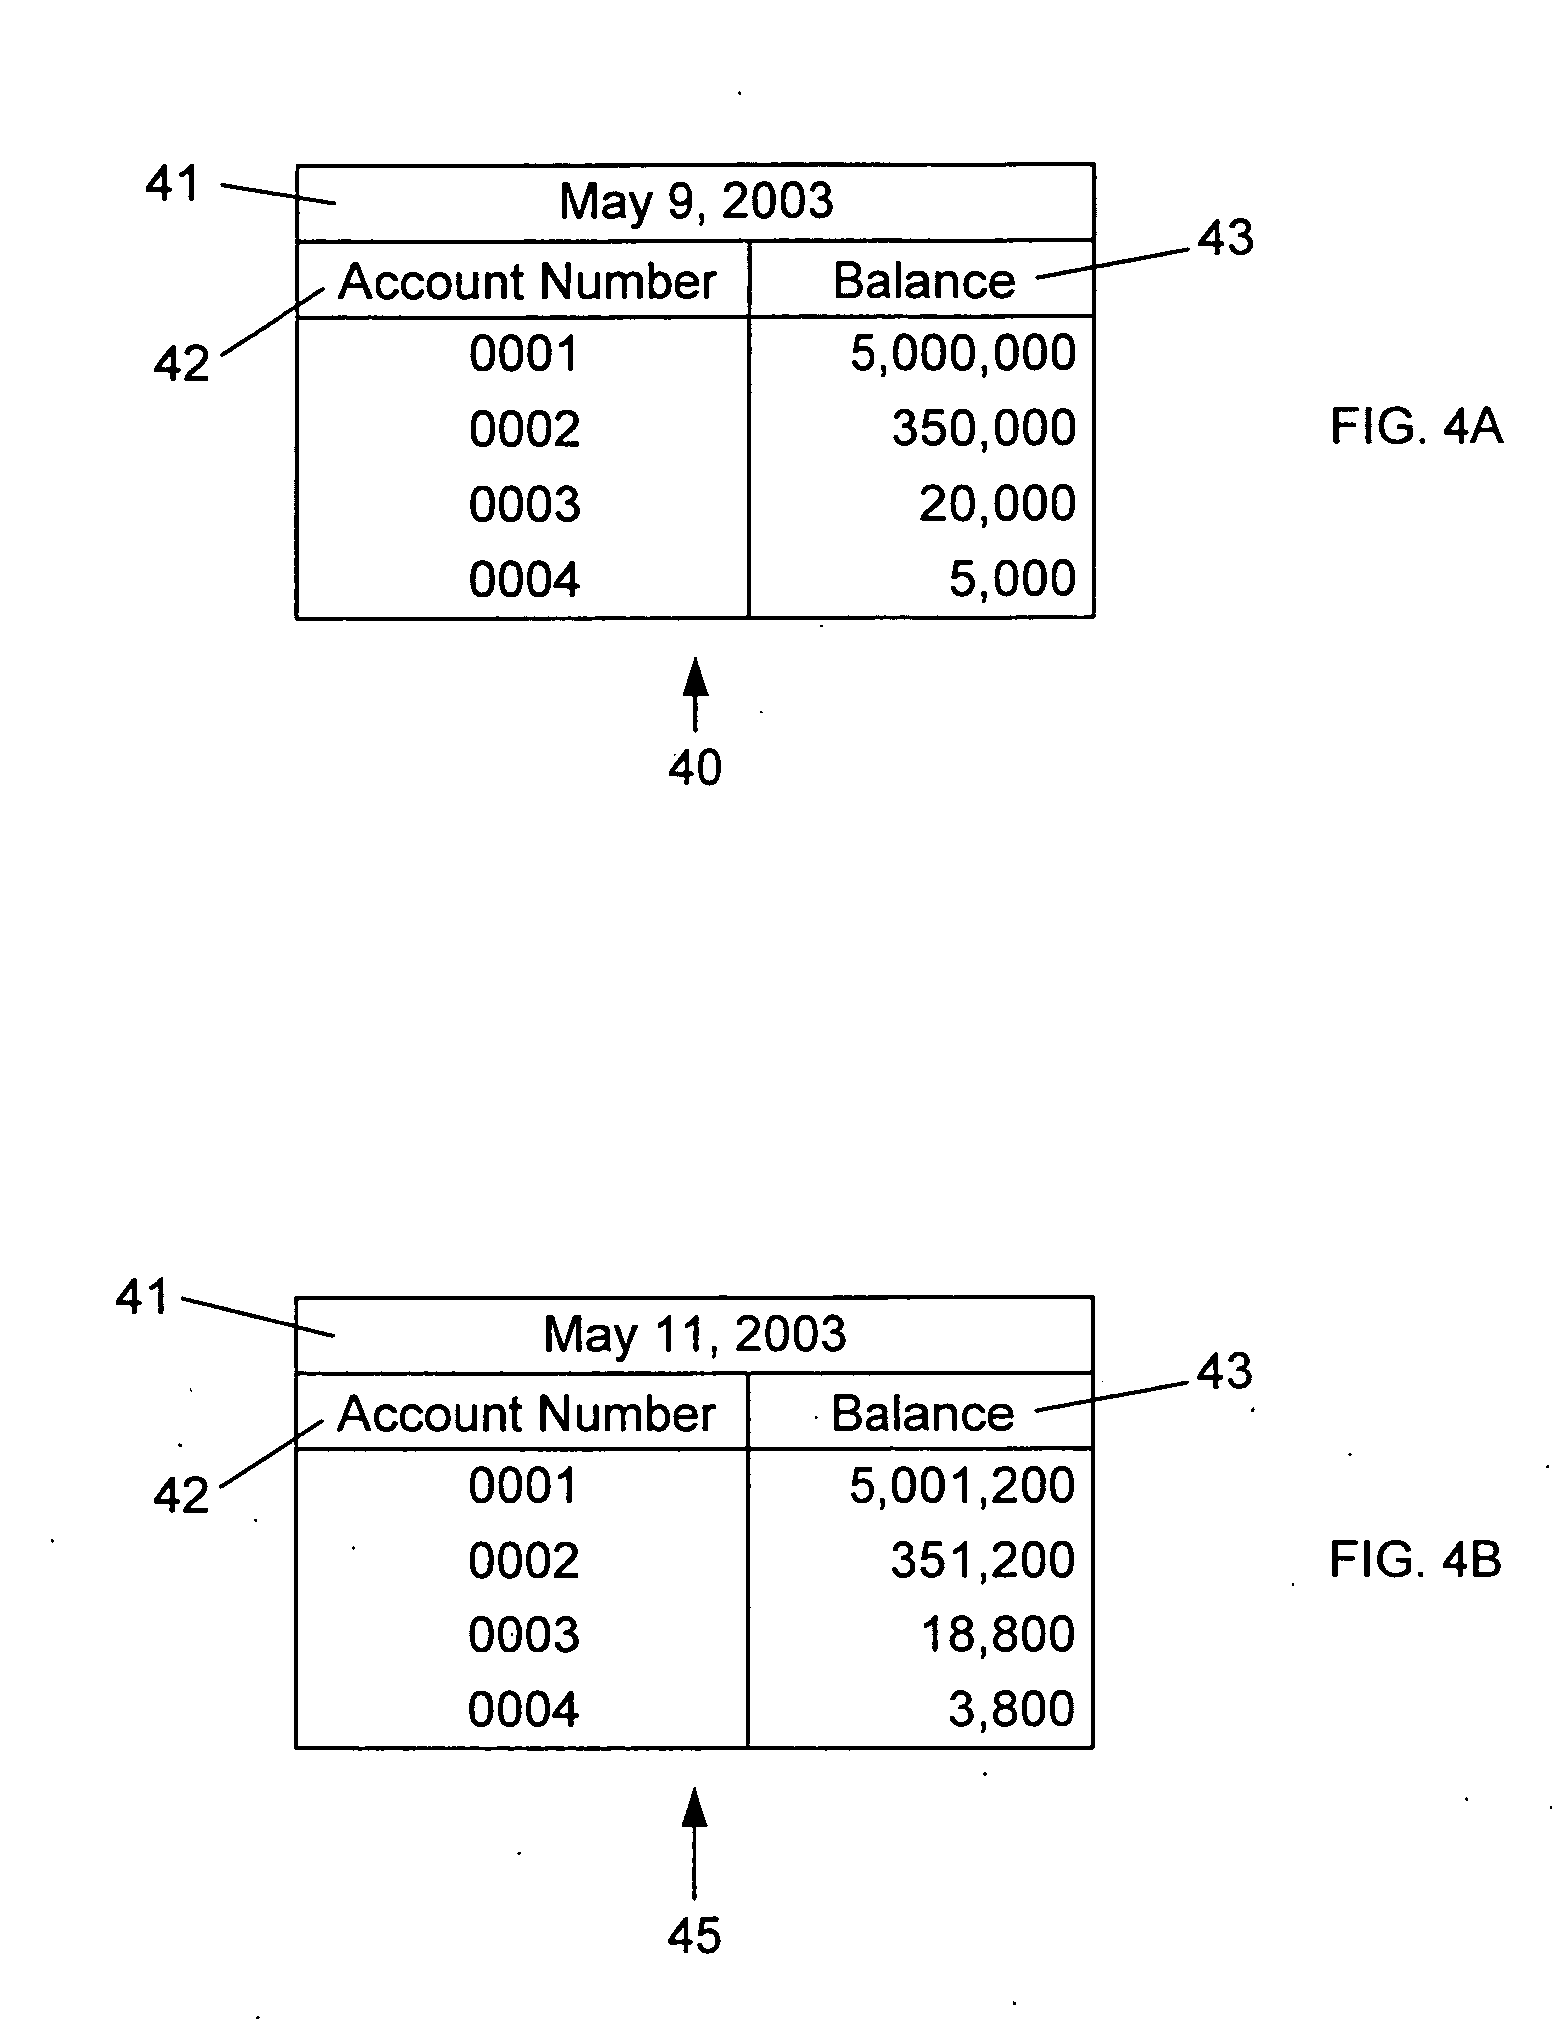 Systems and methods for investigation of financial reporting information